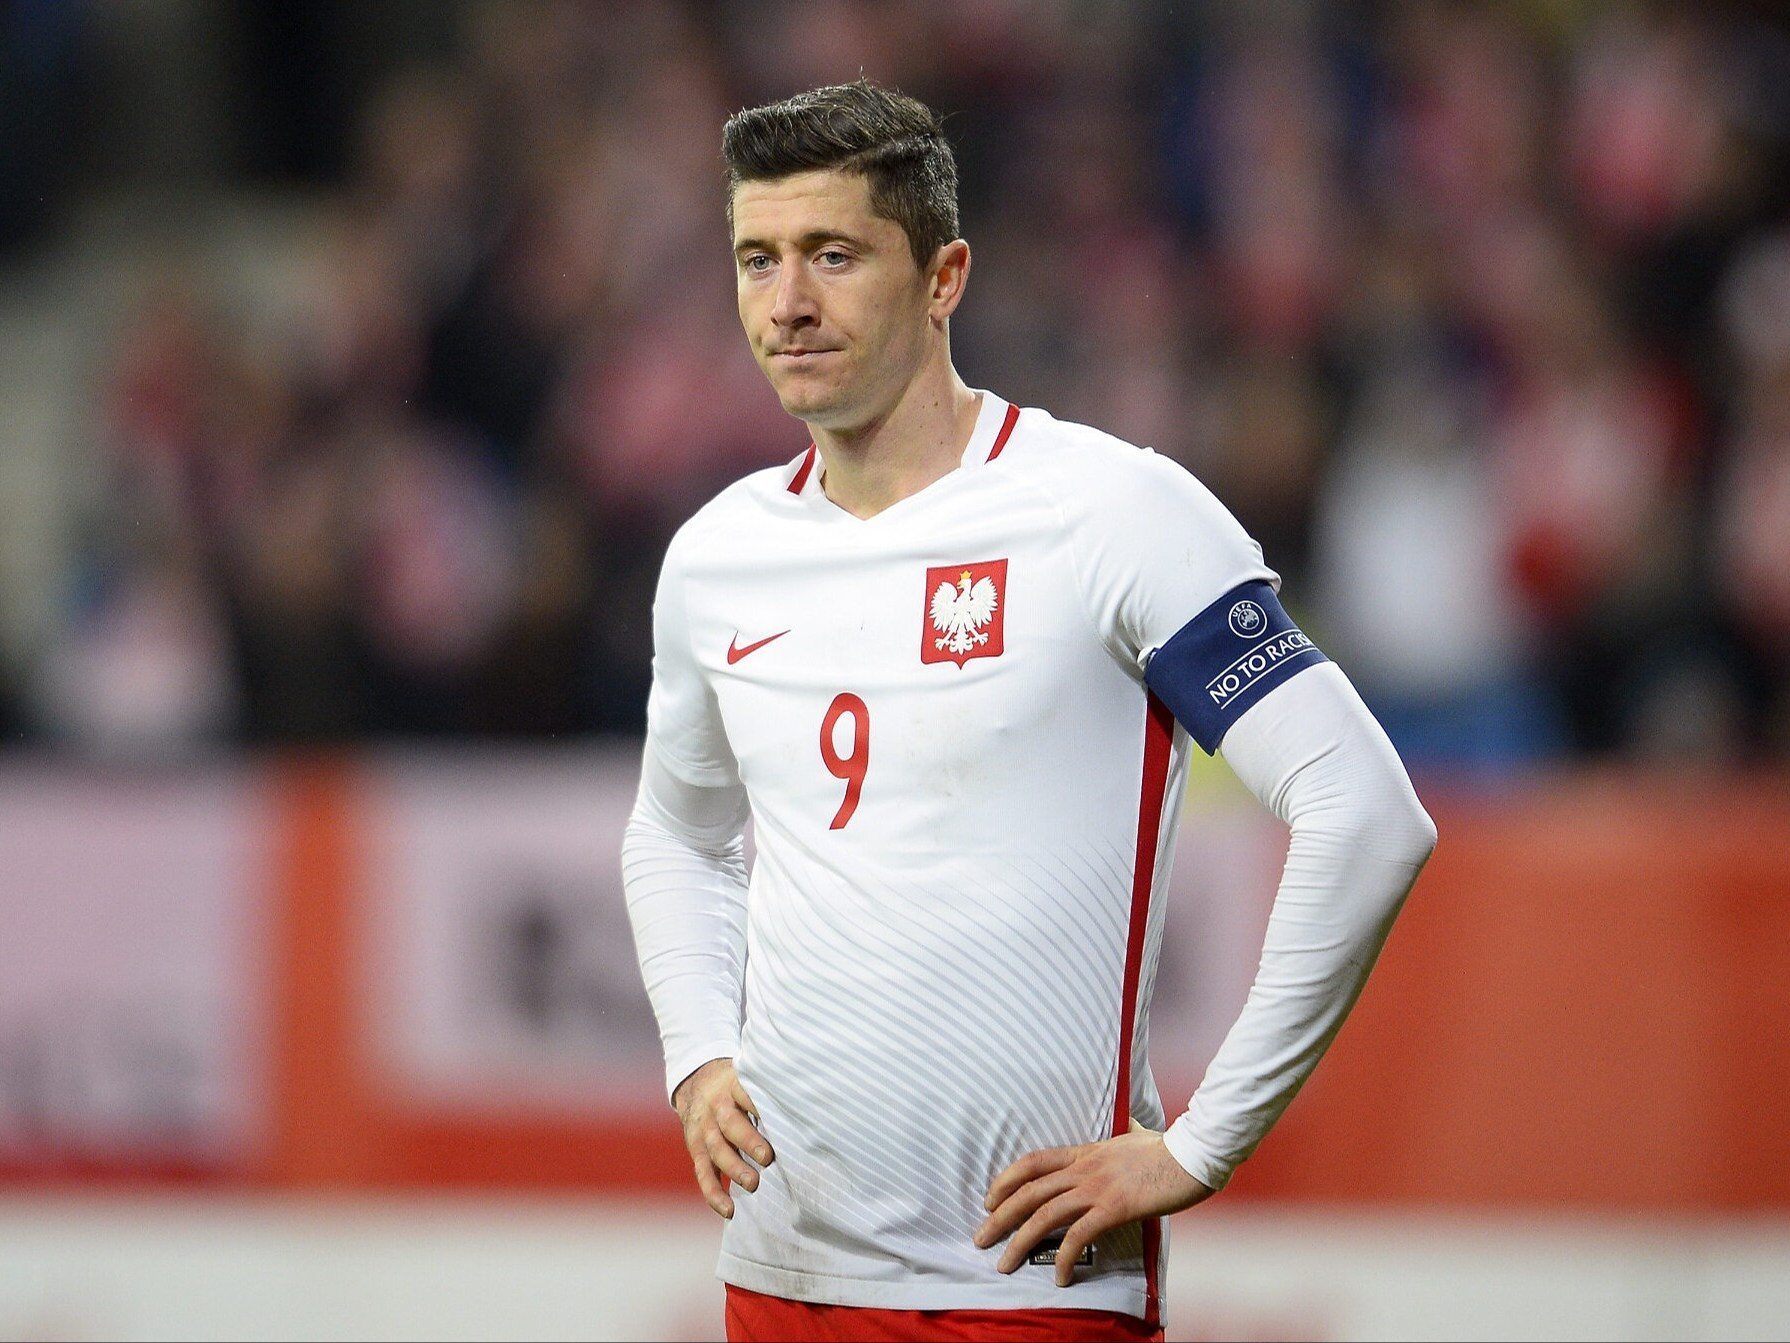 Adam Nawałka spoke about Robert Lewandowski's situation in the national team.  "This is out of place"